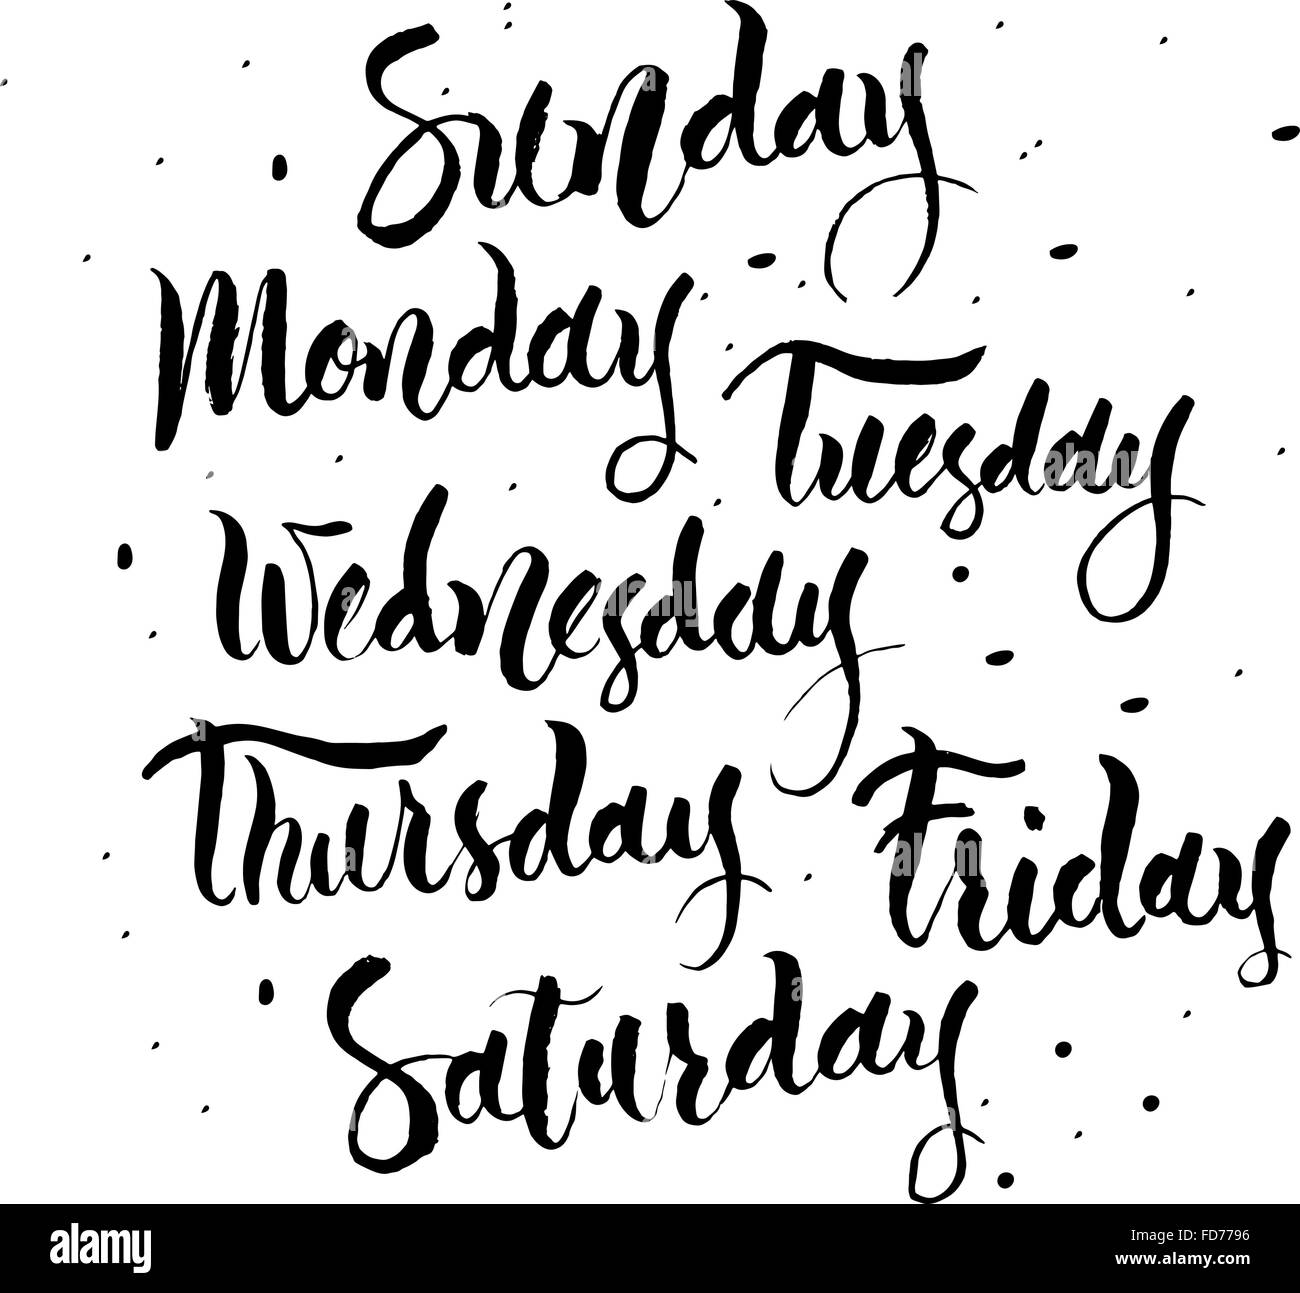 Handwritten Days Of The Week: Monday, Tuesday, Wednesday, Thursday, Friday,  Saturday, Sunday Isolated On White Background. Black Ink Calligraphy Words  Framed. Vector Illustration With Hand Lettering. Royalty Free SVG,  Cliparts, Vectors, and